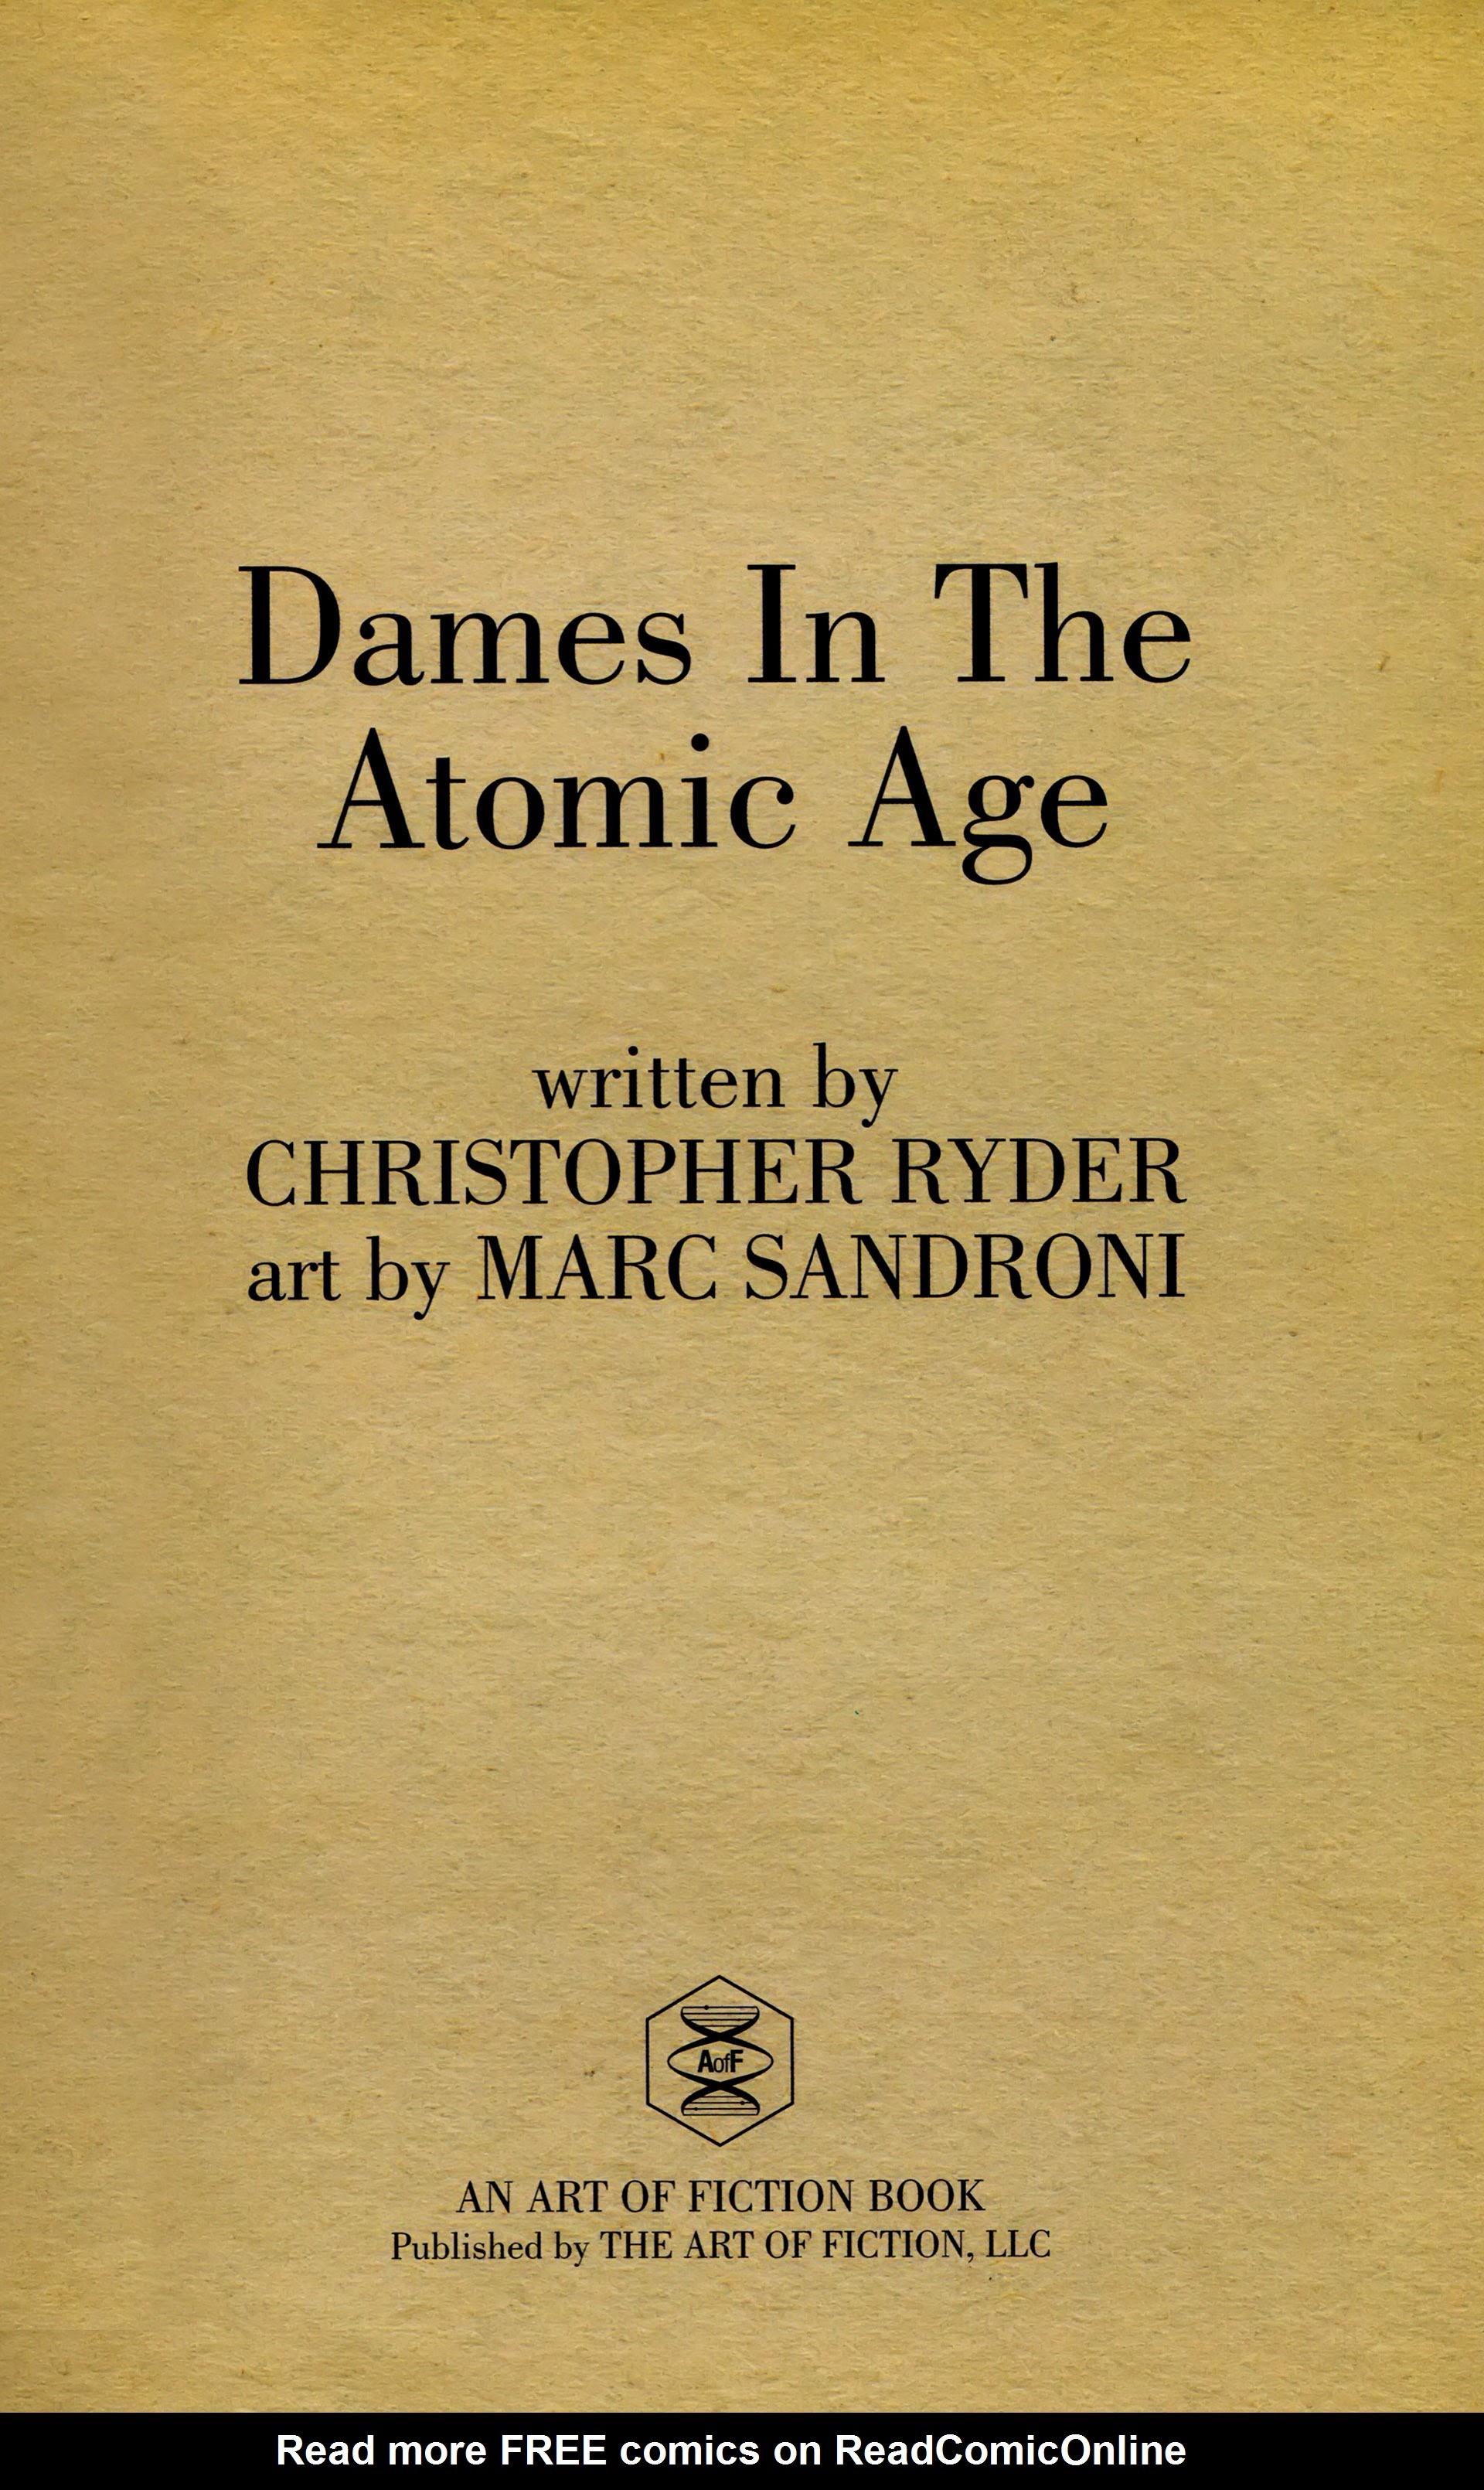 Read online Dames in the Atomic Age comic -  Issue # TPB - 3